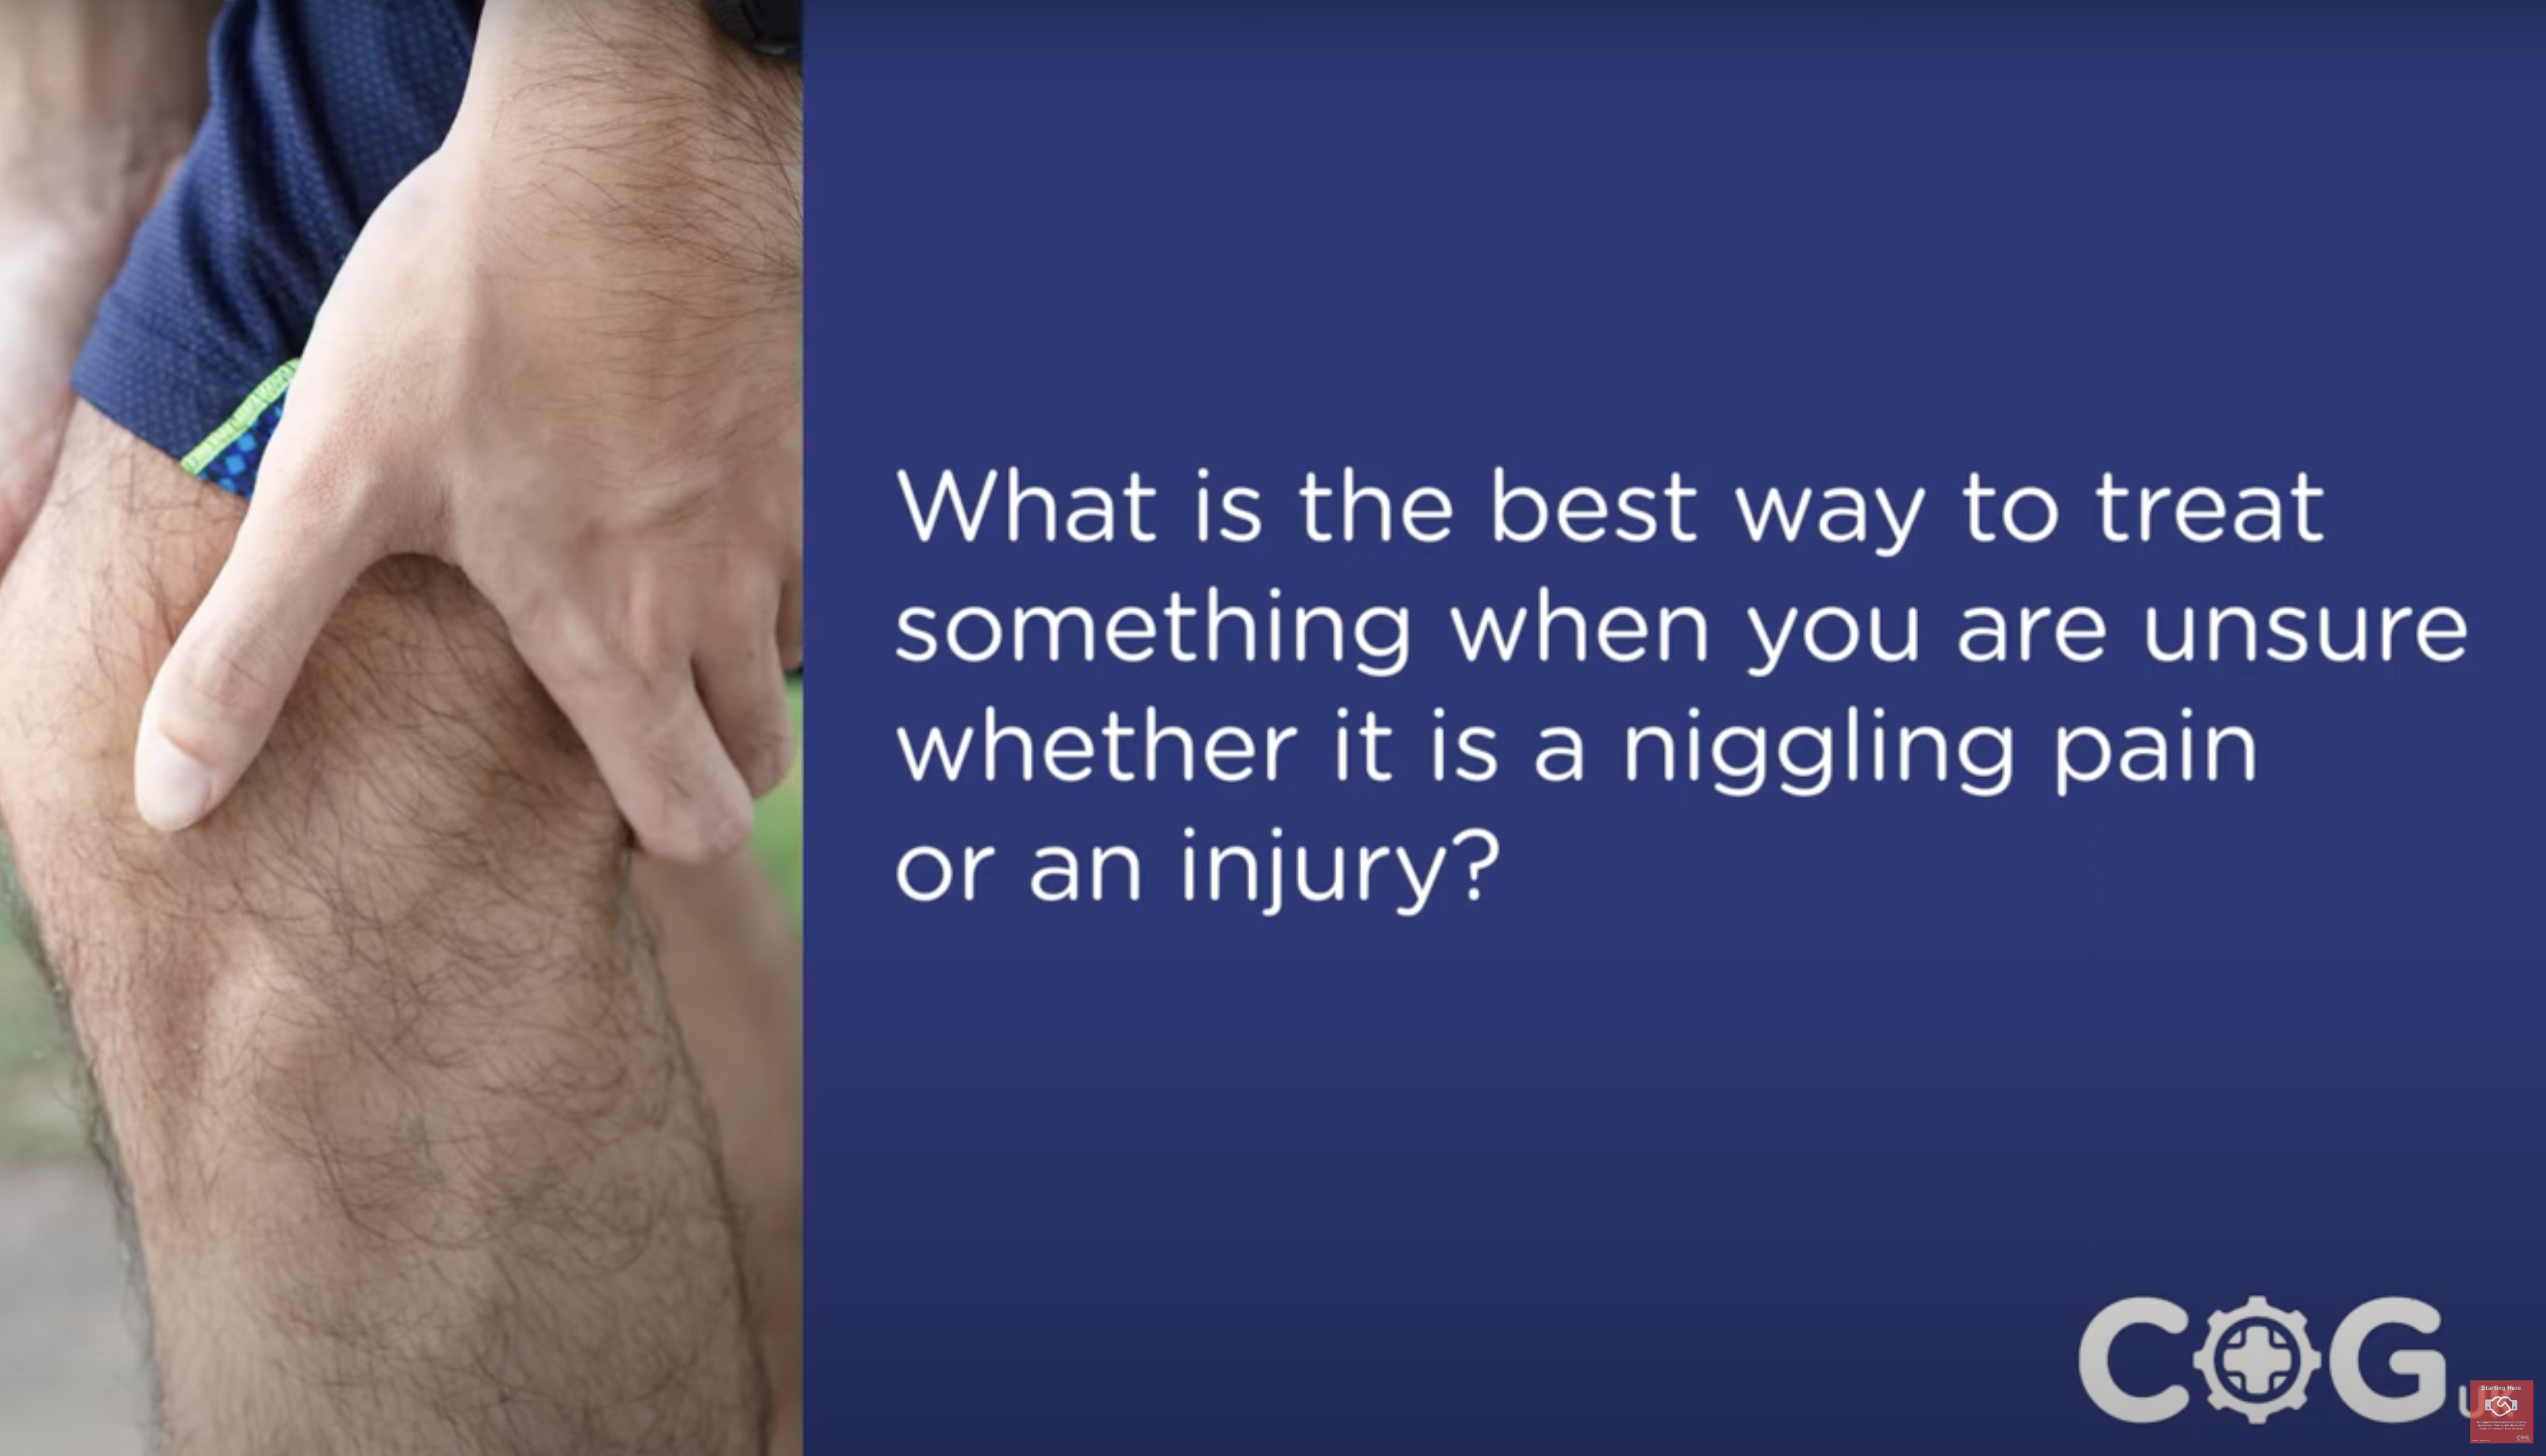 What Is The Best Way To Treat Something When Unsure If It Is A Niggling Pain Or Injury?